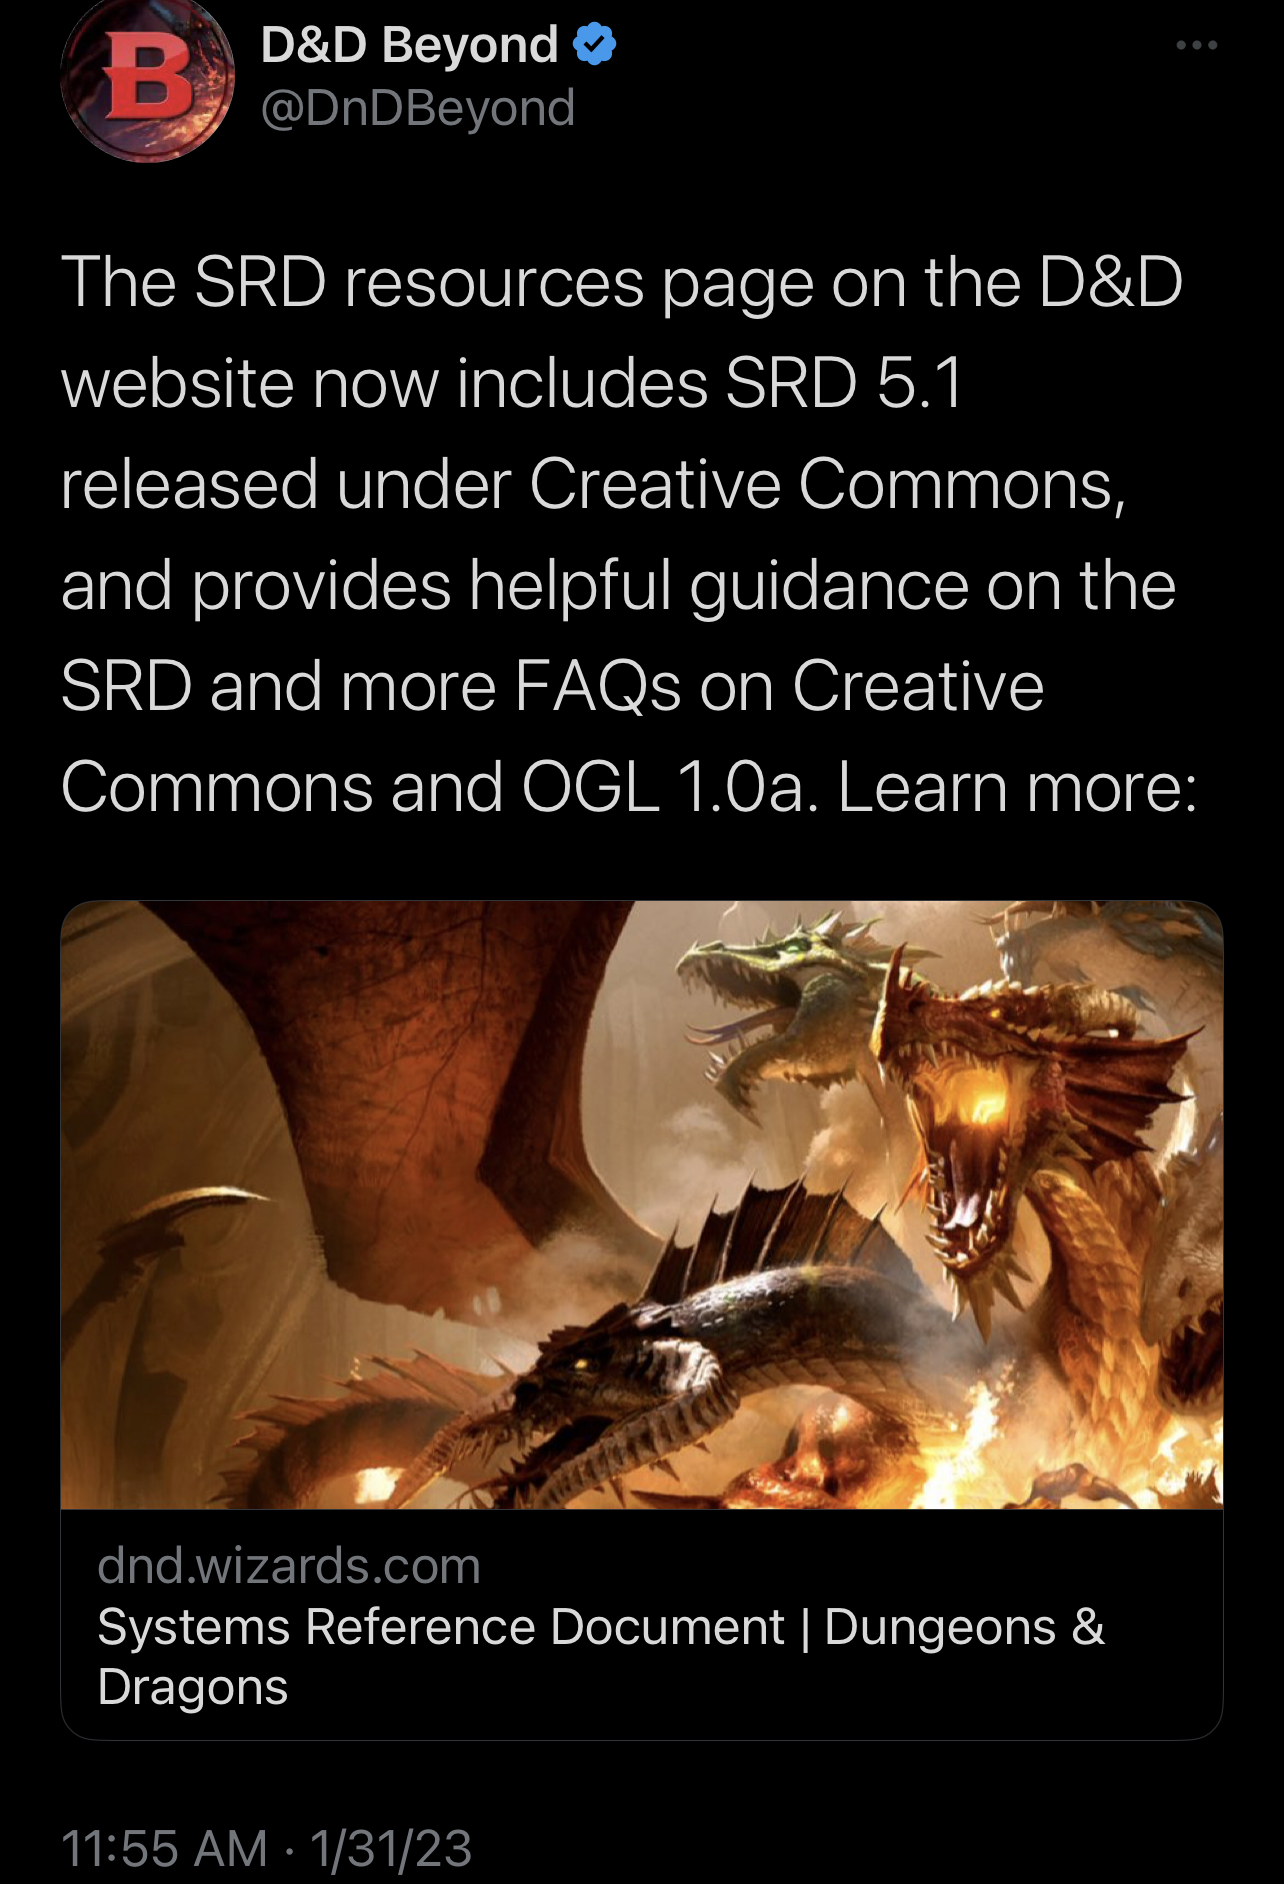 The SRD resources page on the D&D website now includes SRD 5.1 released under Creative Commons, and provides helpful guidance on the SRD and more FAQs on Creative Commons and OGL 1.0a. Learn more: